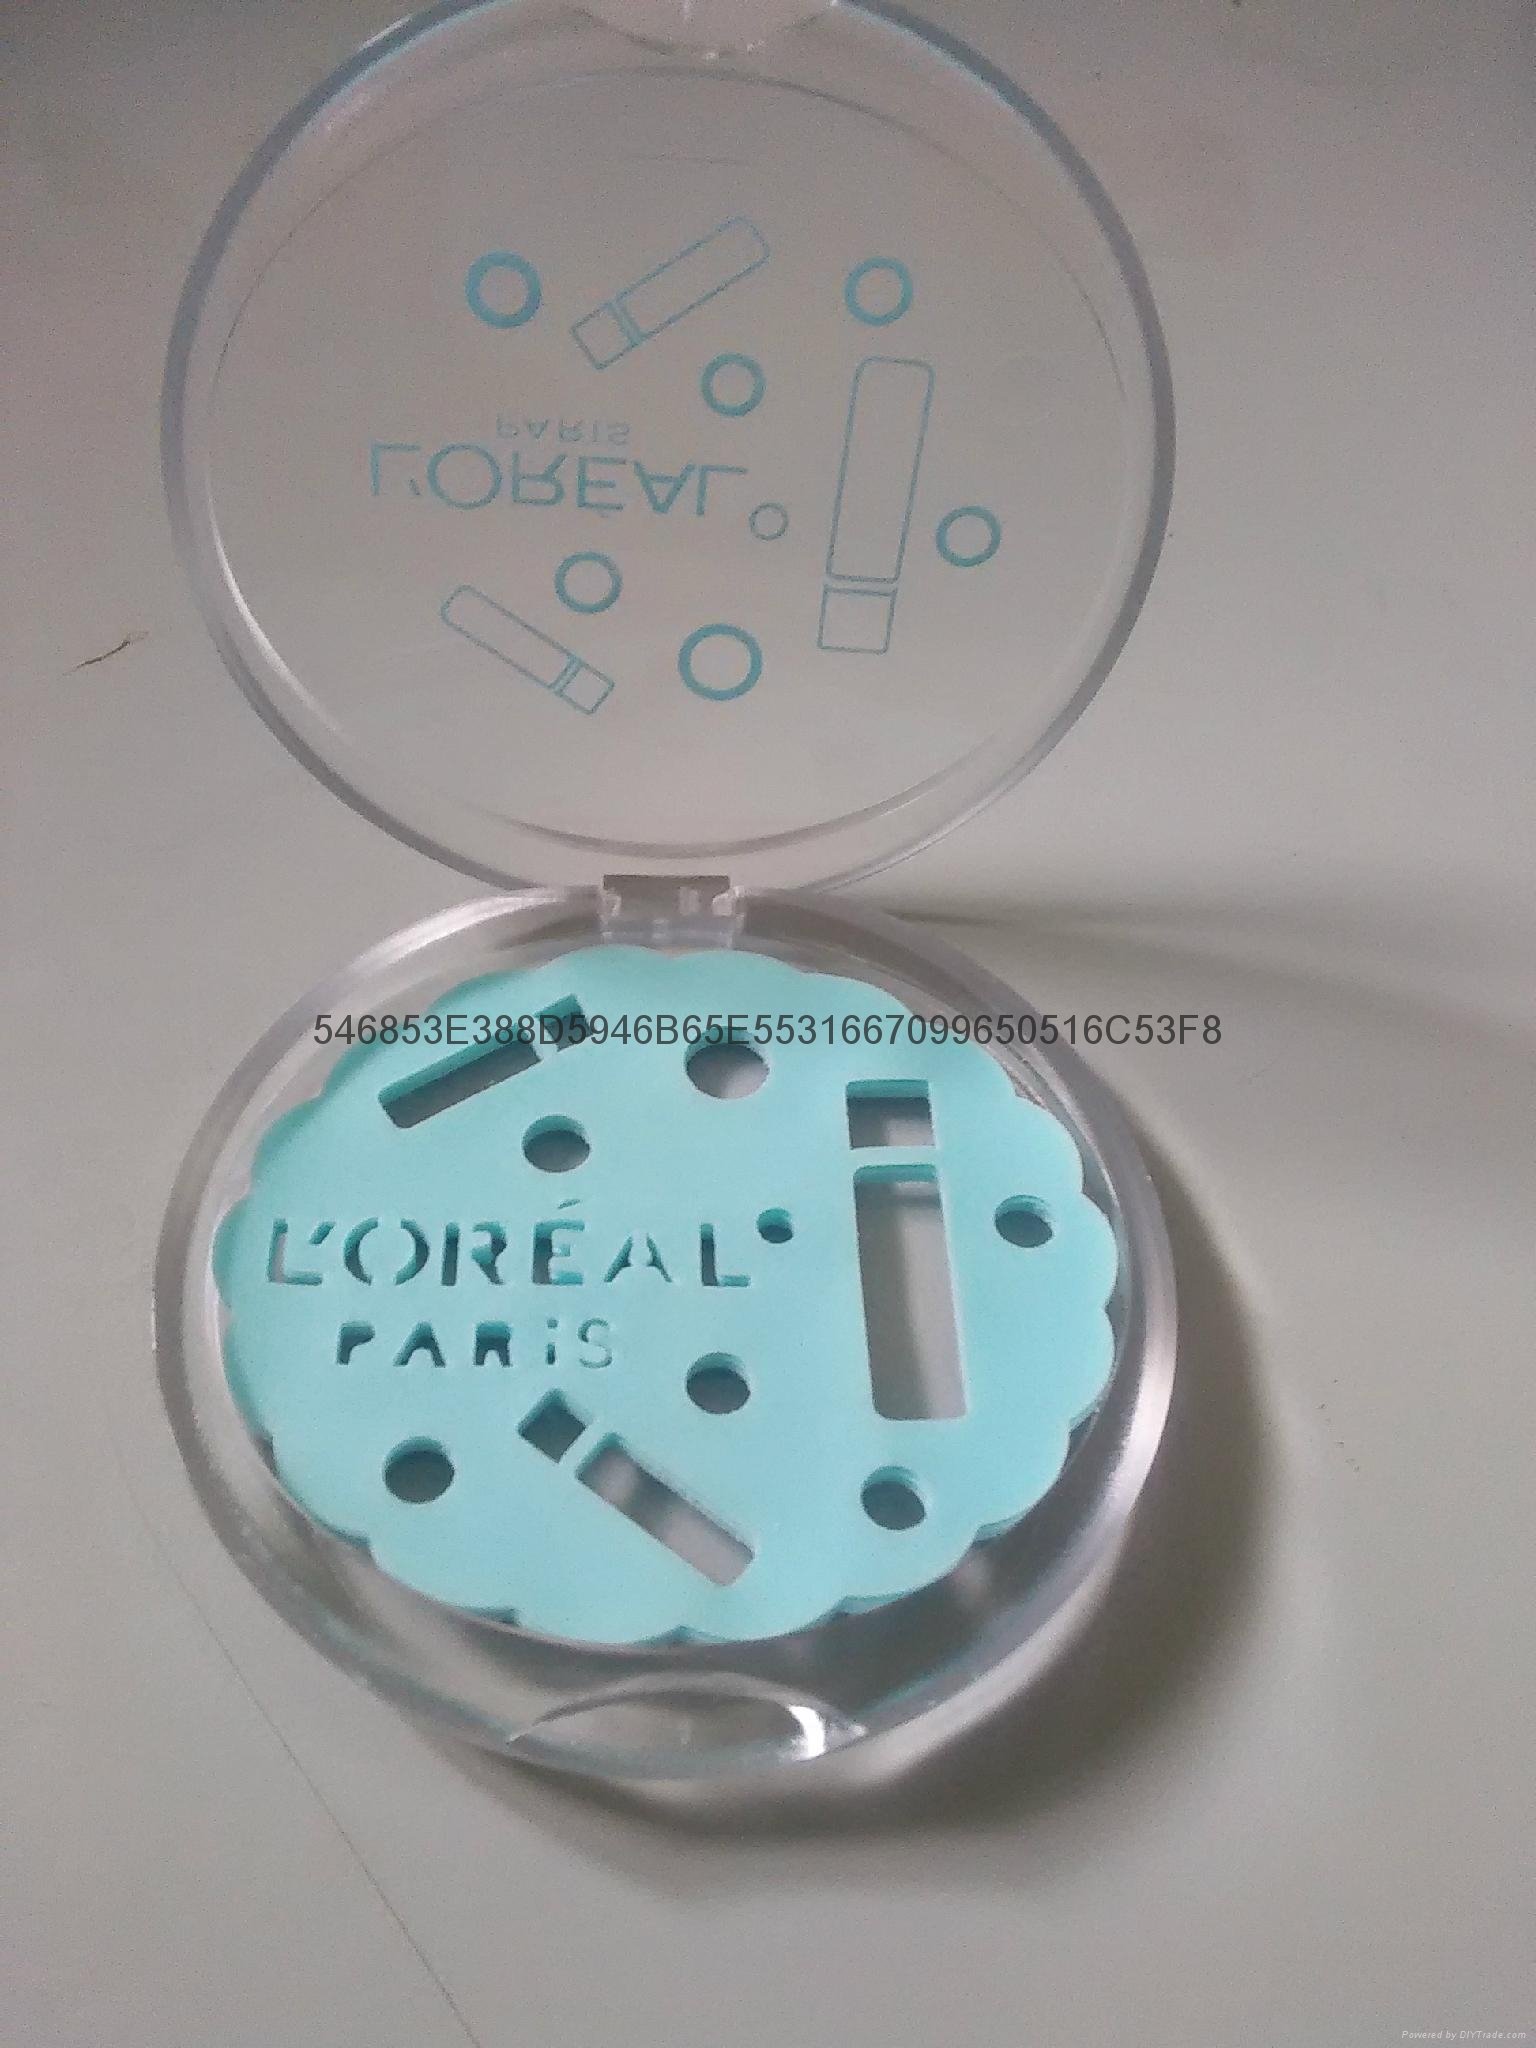  L 'oreal fine paper soap and clean skin 3